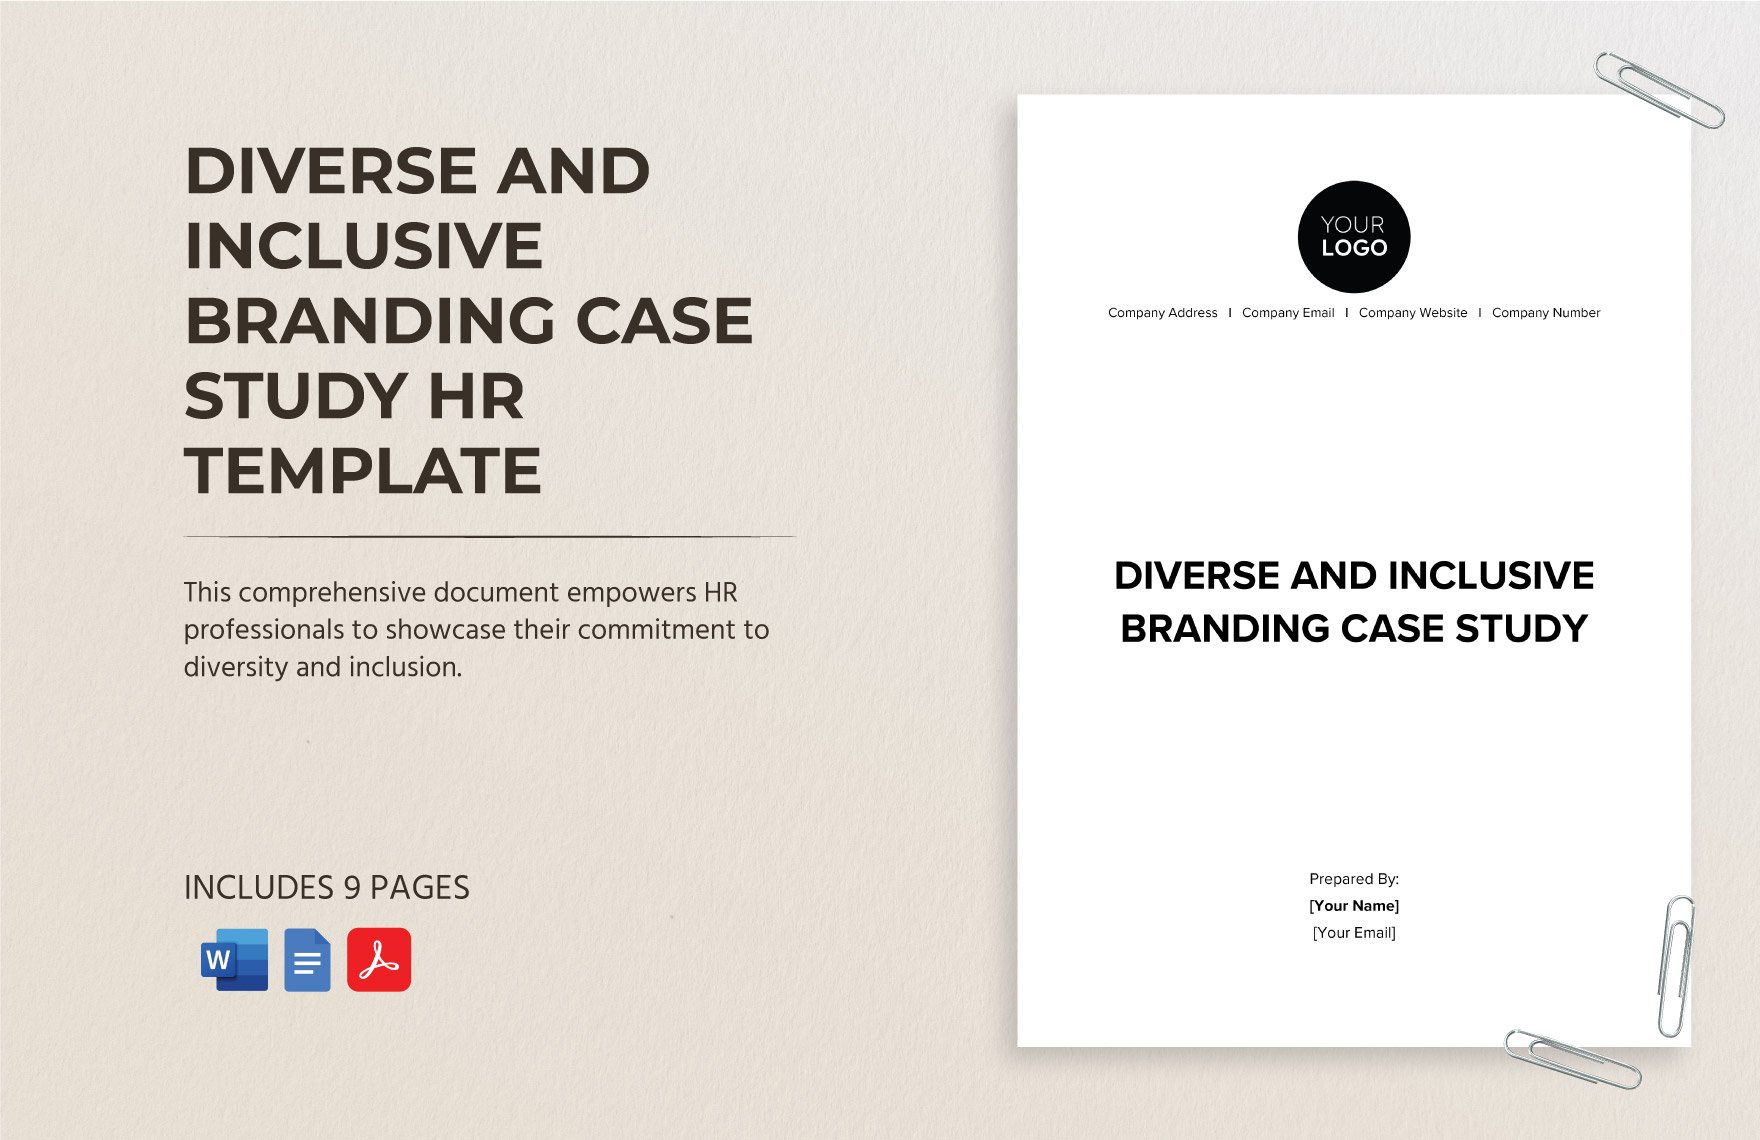 Diverse and Inclusive Branding Case Study HR Template in Word, Google Docs, PDF